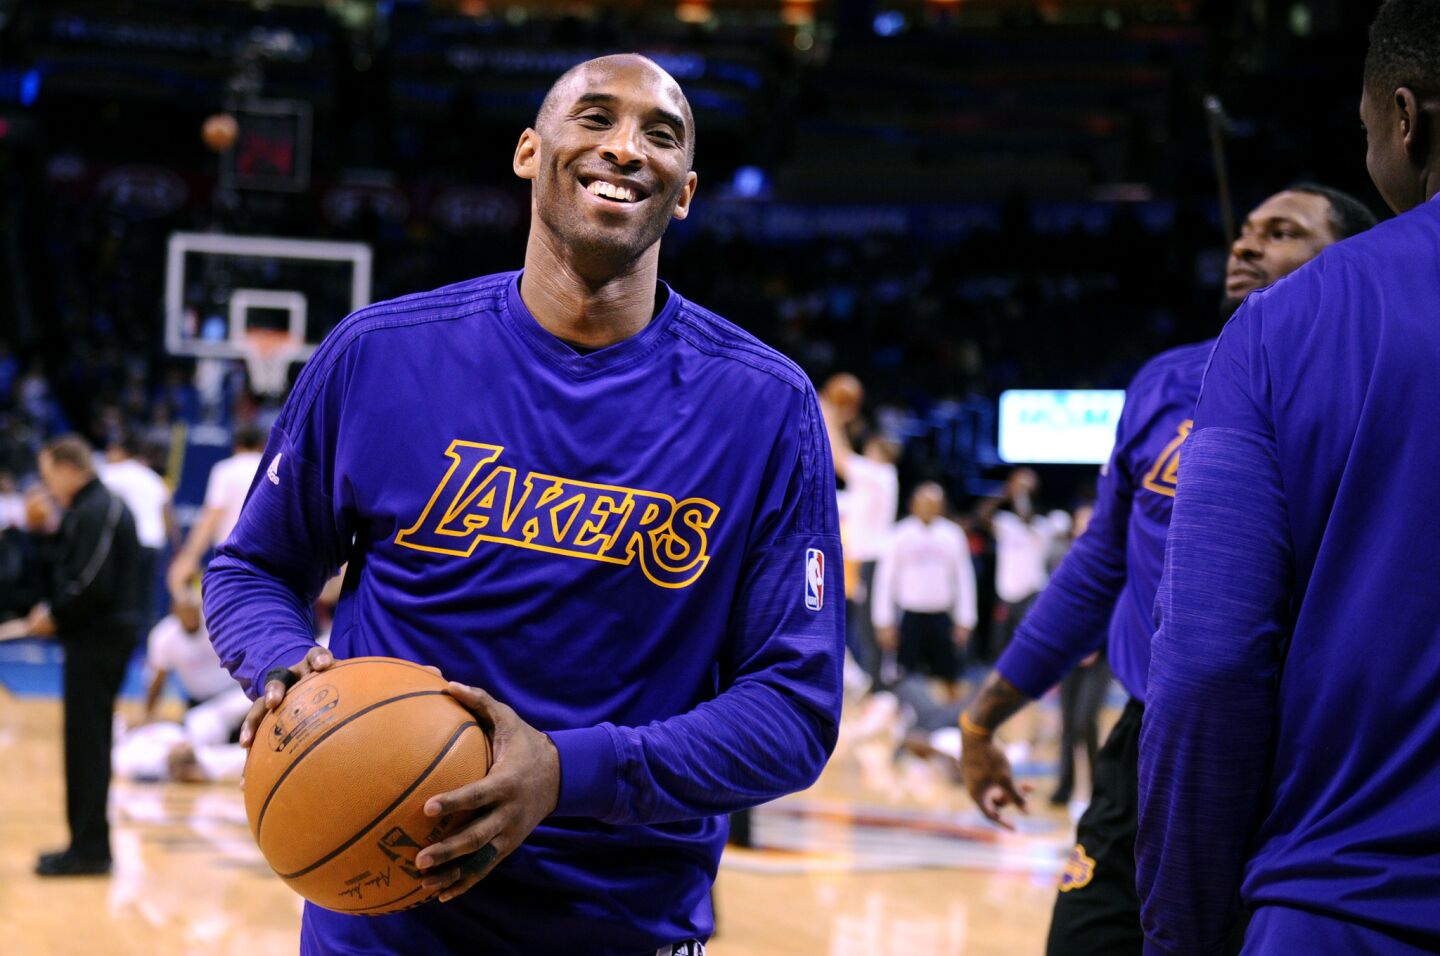 Kobe Bryant laughs with teammates before a game against the Thunder in Oklahoma City on April 11.